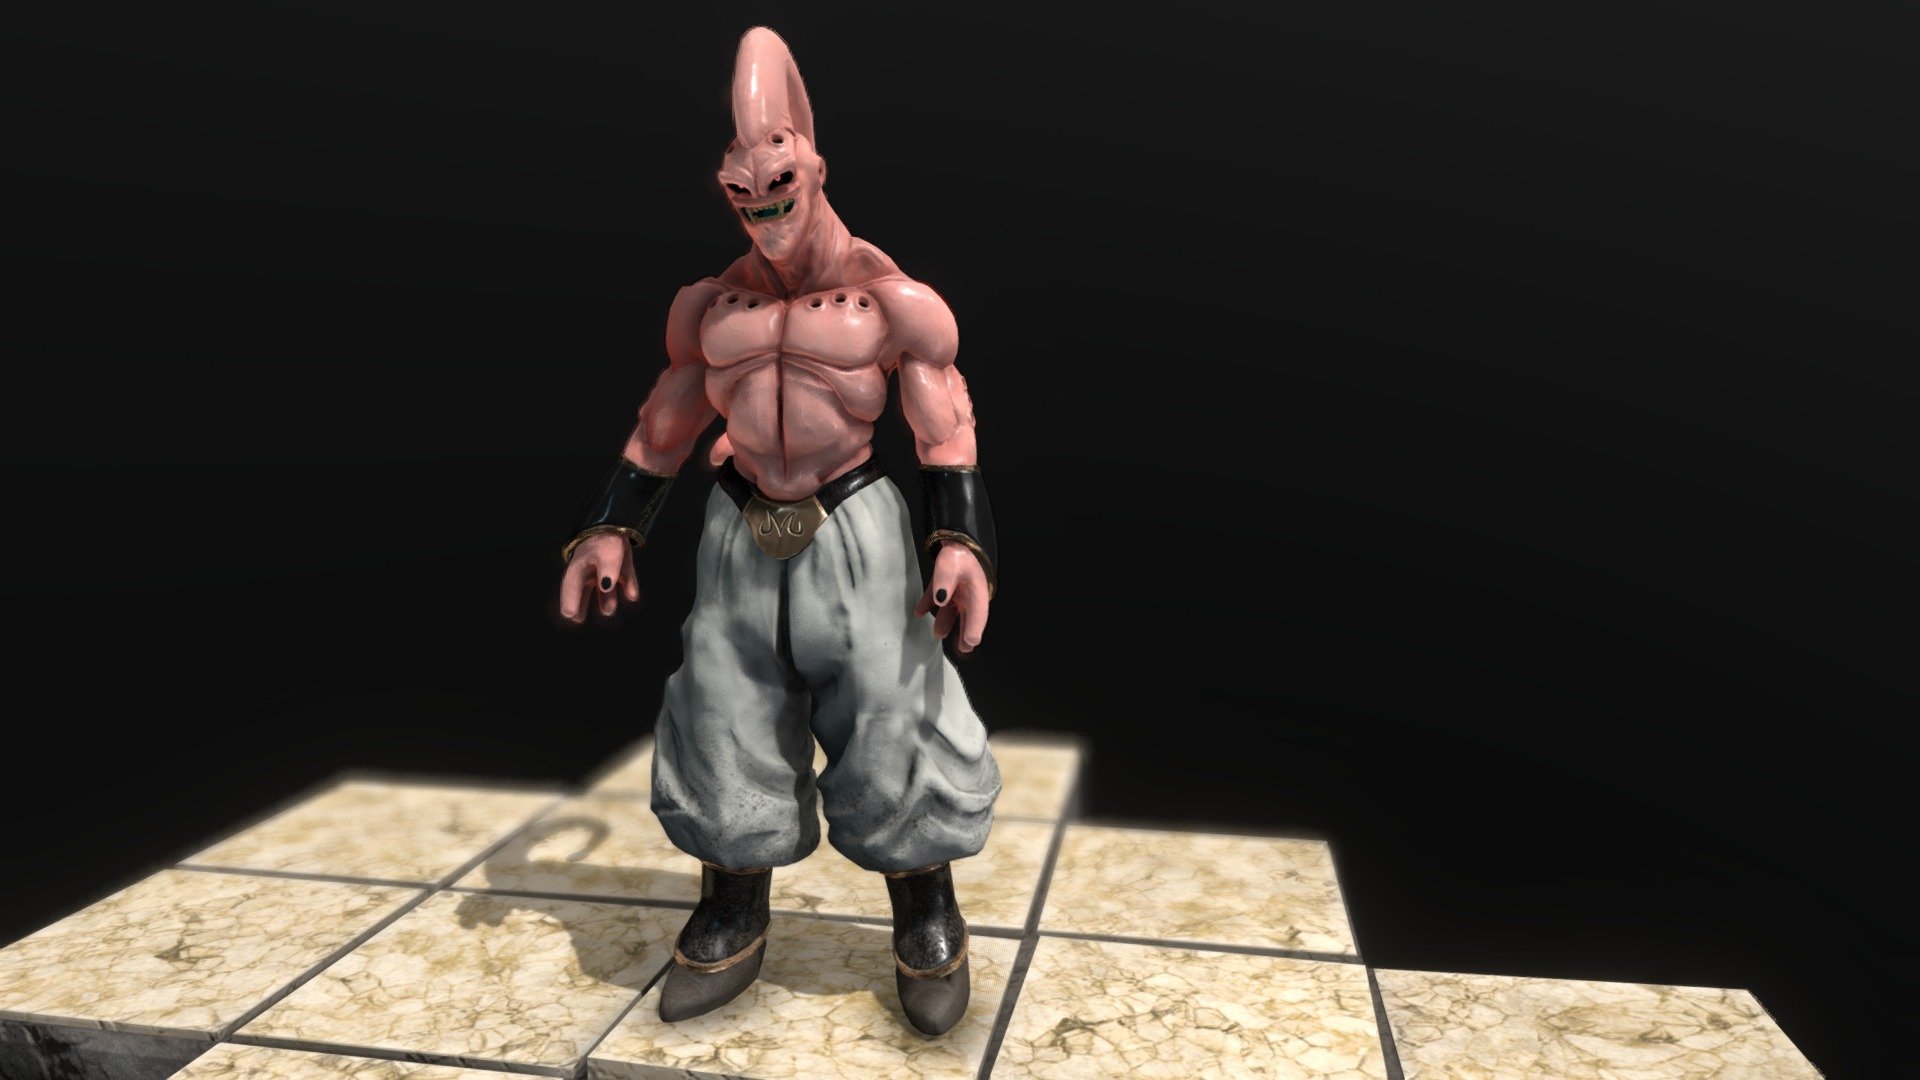 Majin Buu was made over the space of 3 weeks in ZBrush and textured in Substance Painter.
This model was based on the character from Dragonball Z.

22,280 Polys
2 texture sets - Majin Buu - 3D model by Kelvin Avey (@ka2851) 3d model